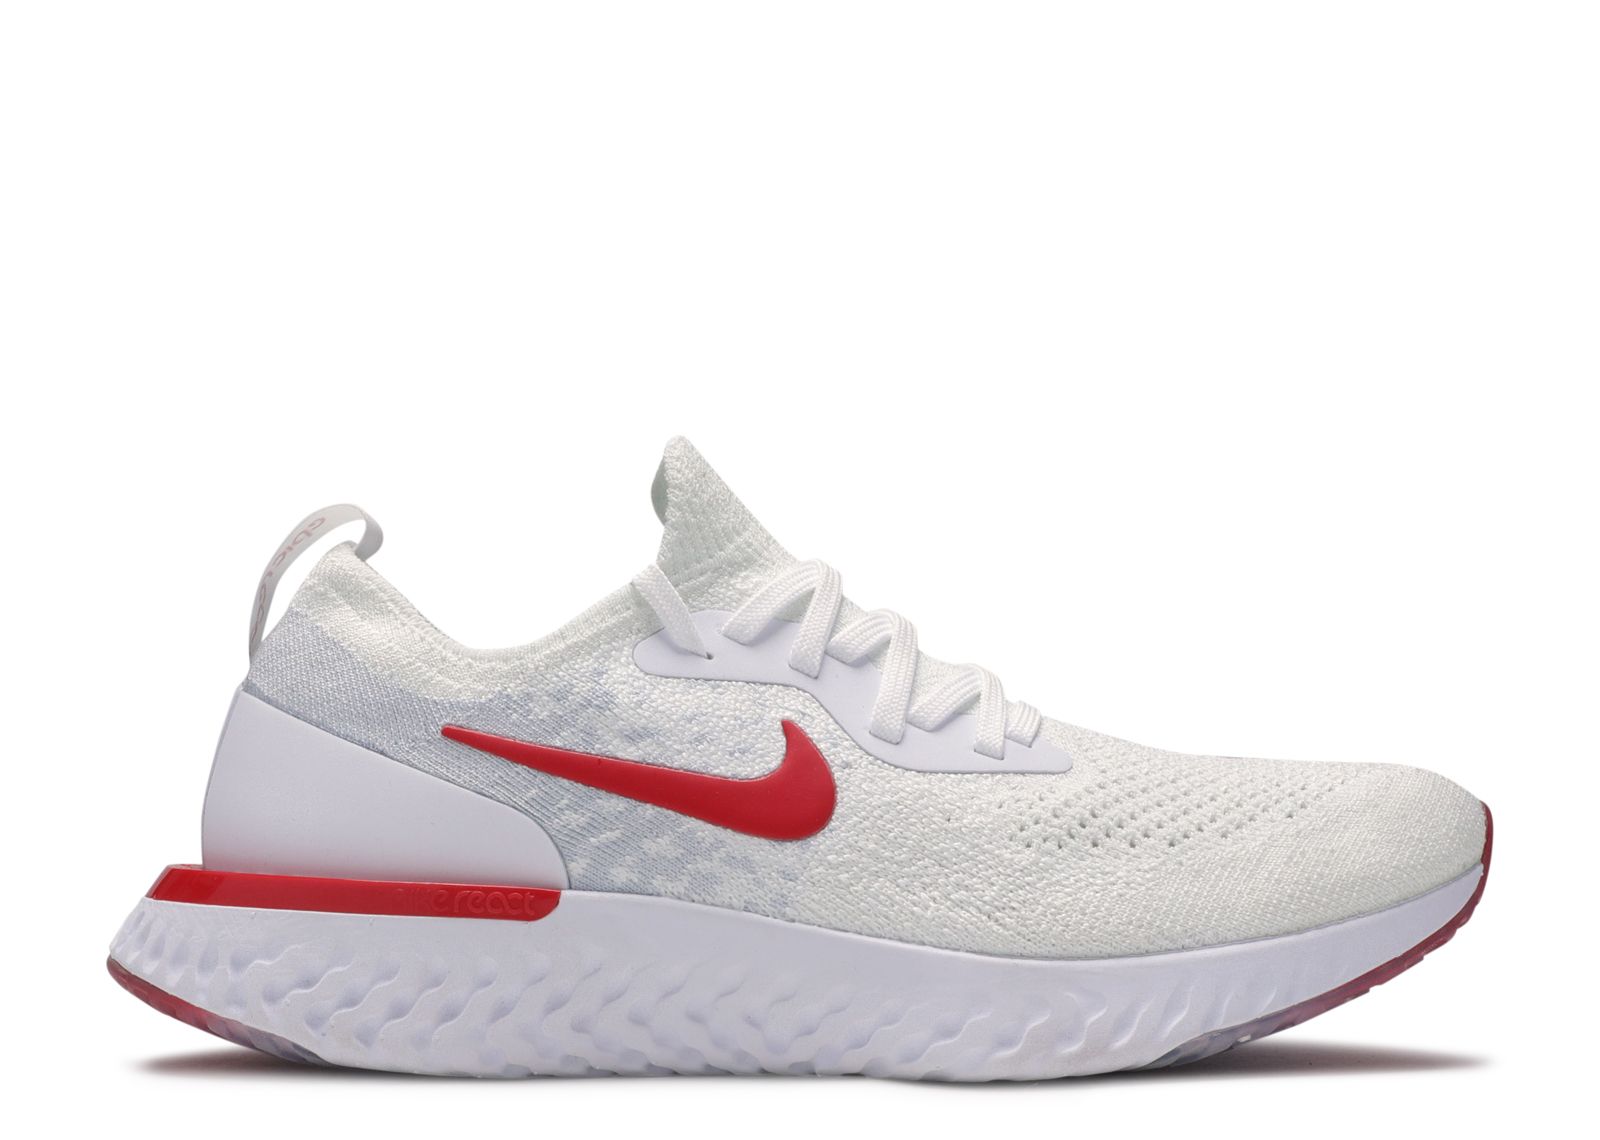 nike epic react flyknit white and red